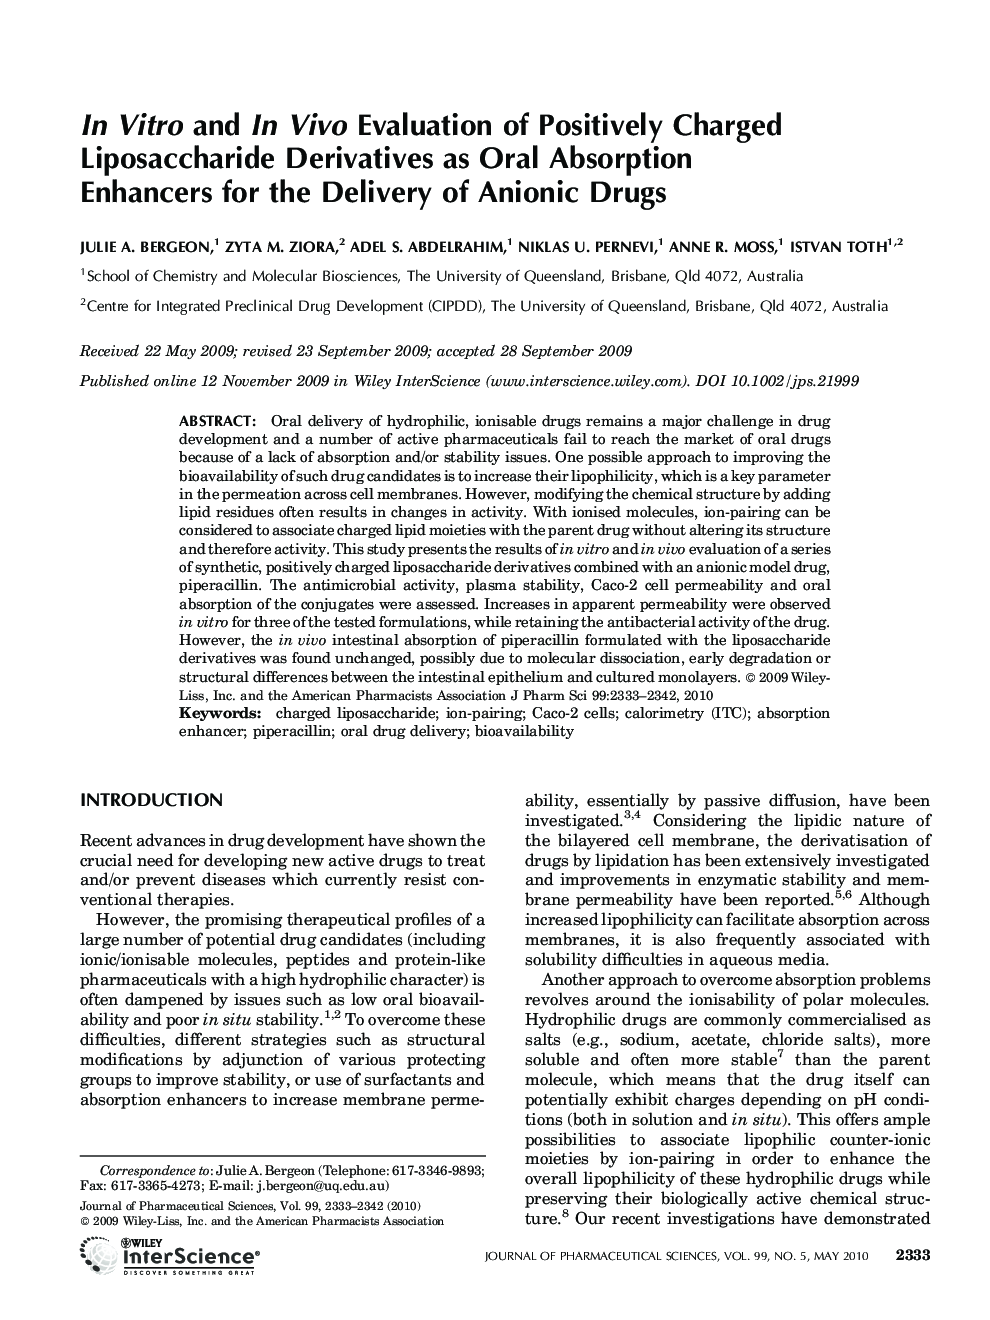 In vitro and In vivo evaluation of positively charged liposaccharide derivatives as oral absorption enhancers for the delivery of anionic drugs